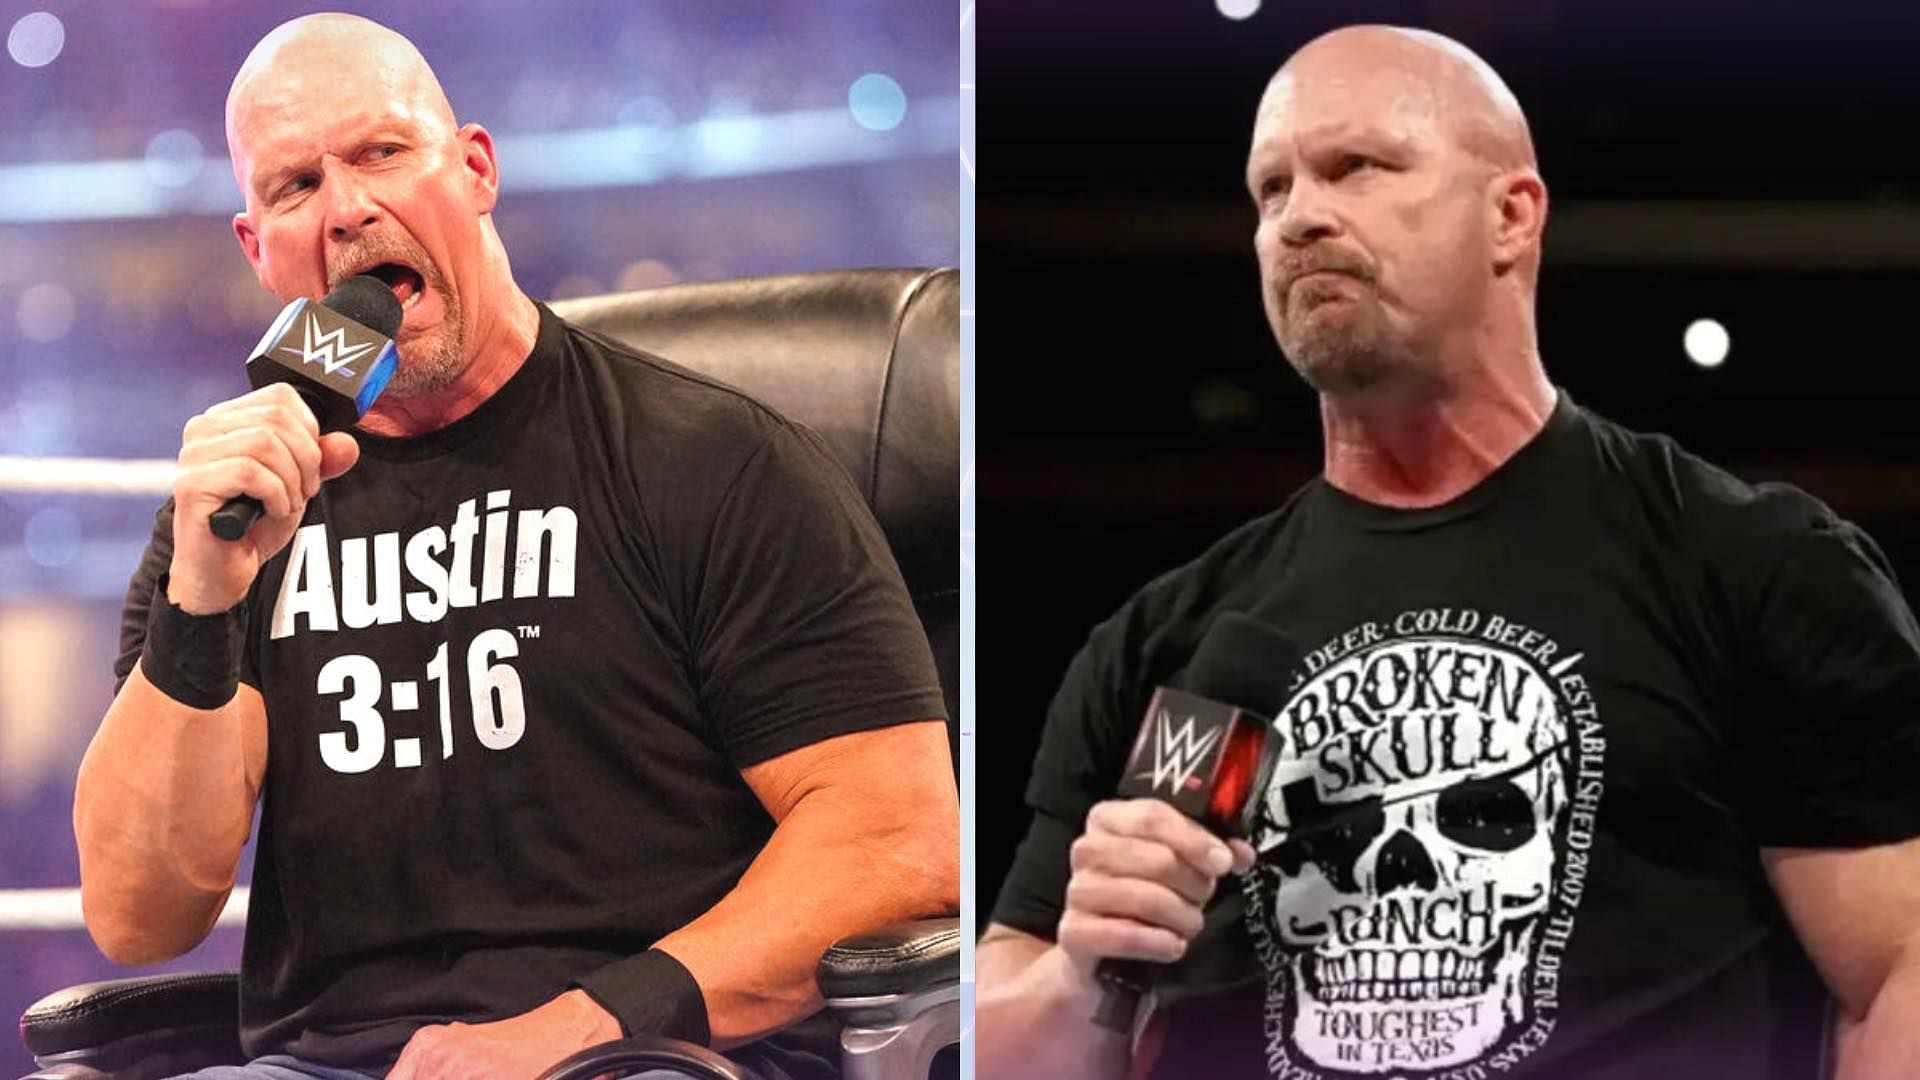 WWE Icon 'Stone Cold' Steve Austin Gives Up Beer for Healthy Lifestyle